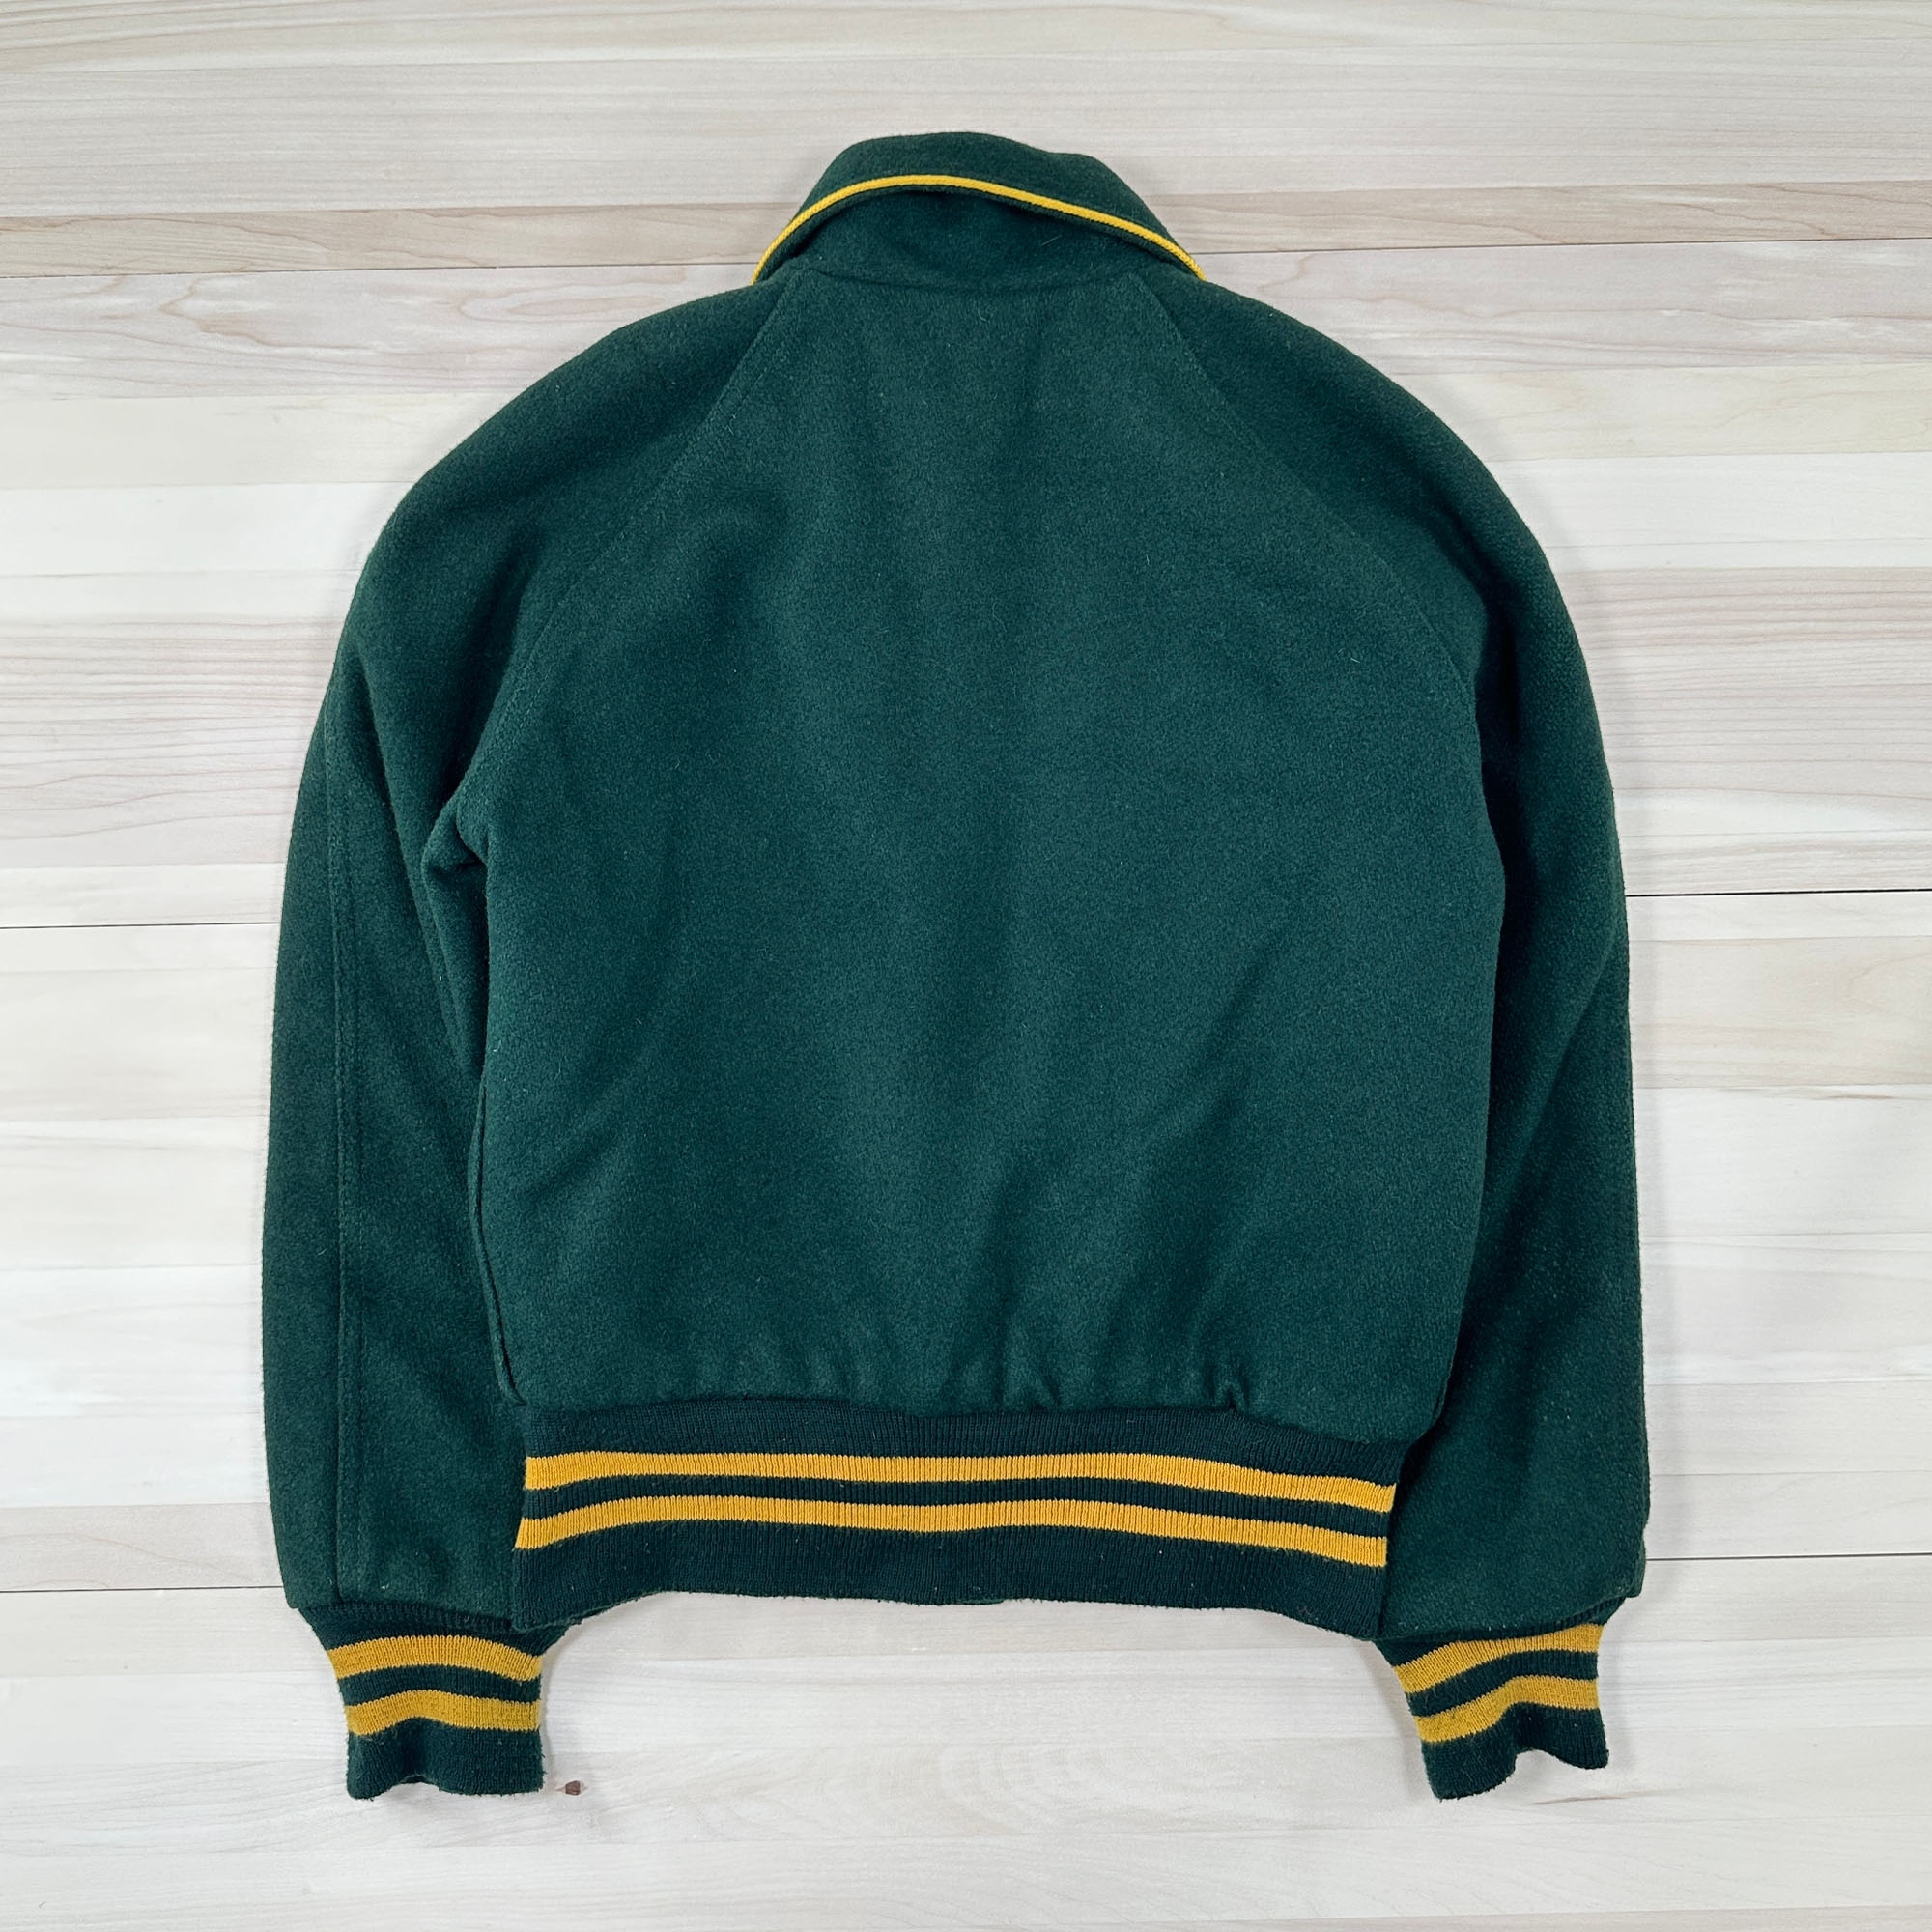 Vintage Maple Wool Varsity Jacket Packers Green and Gold - Small-6